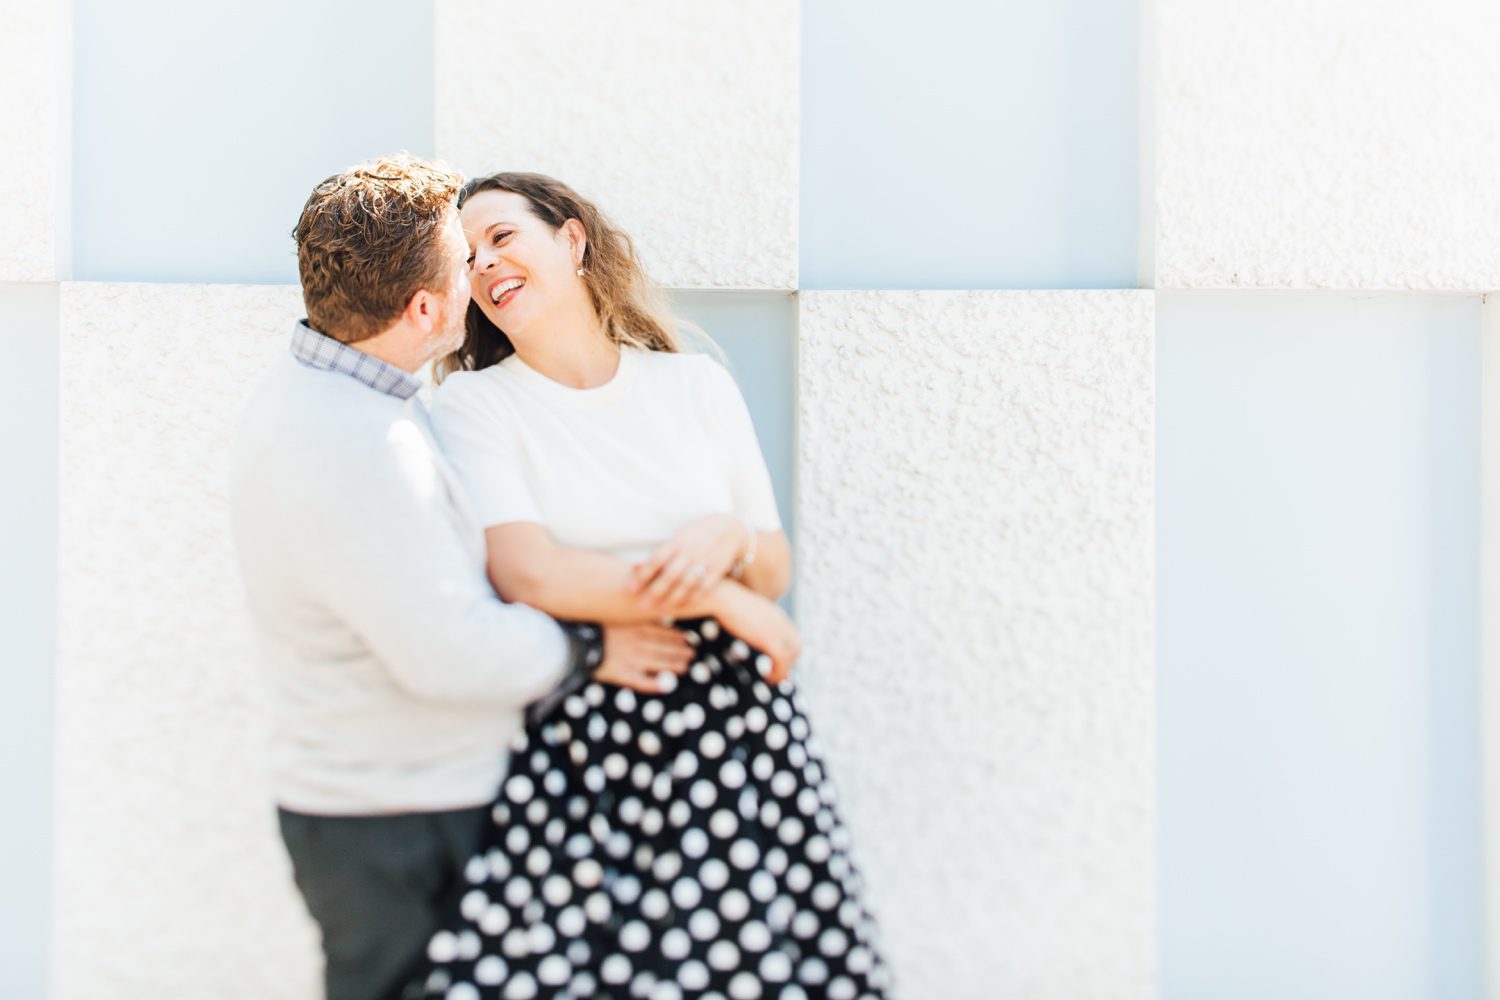 disney themed couples session with polkadot skirt